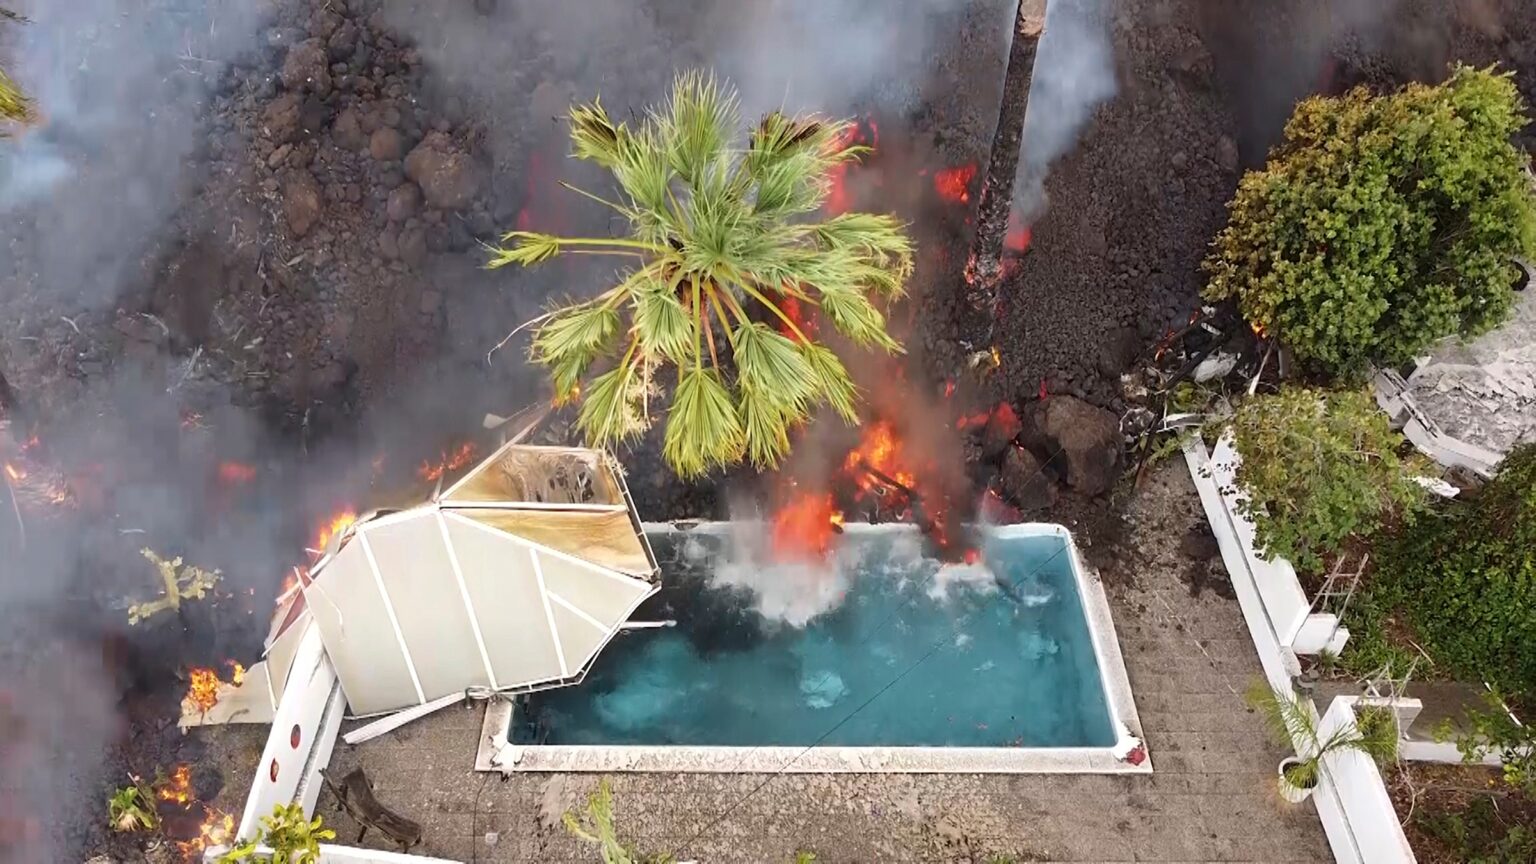 La Palma eruption – Dramatic video shows lava BOILING swimming pool water and destroying homes as thousands flee